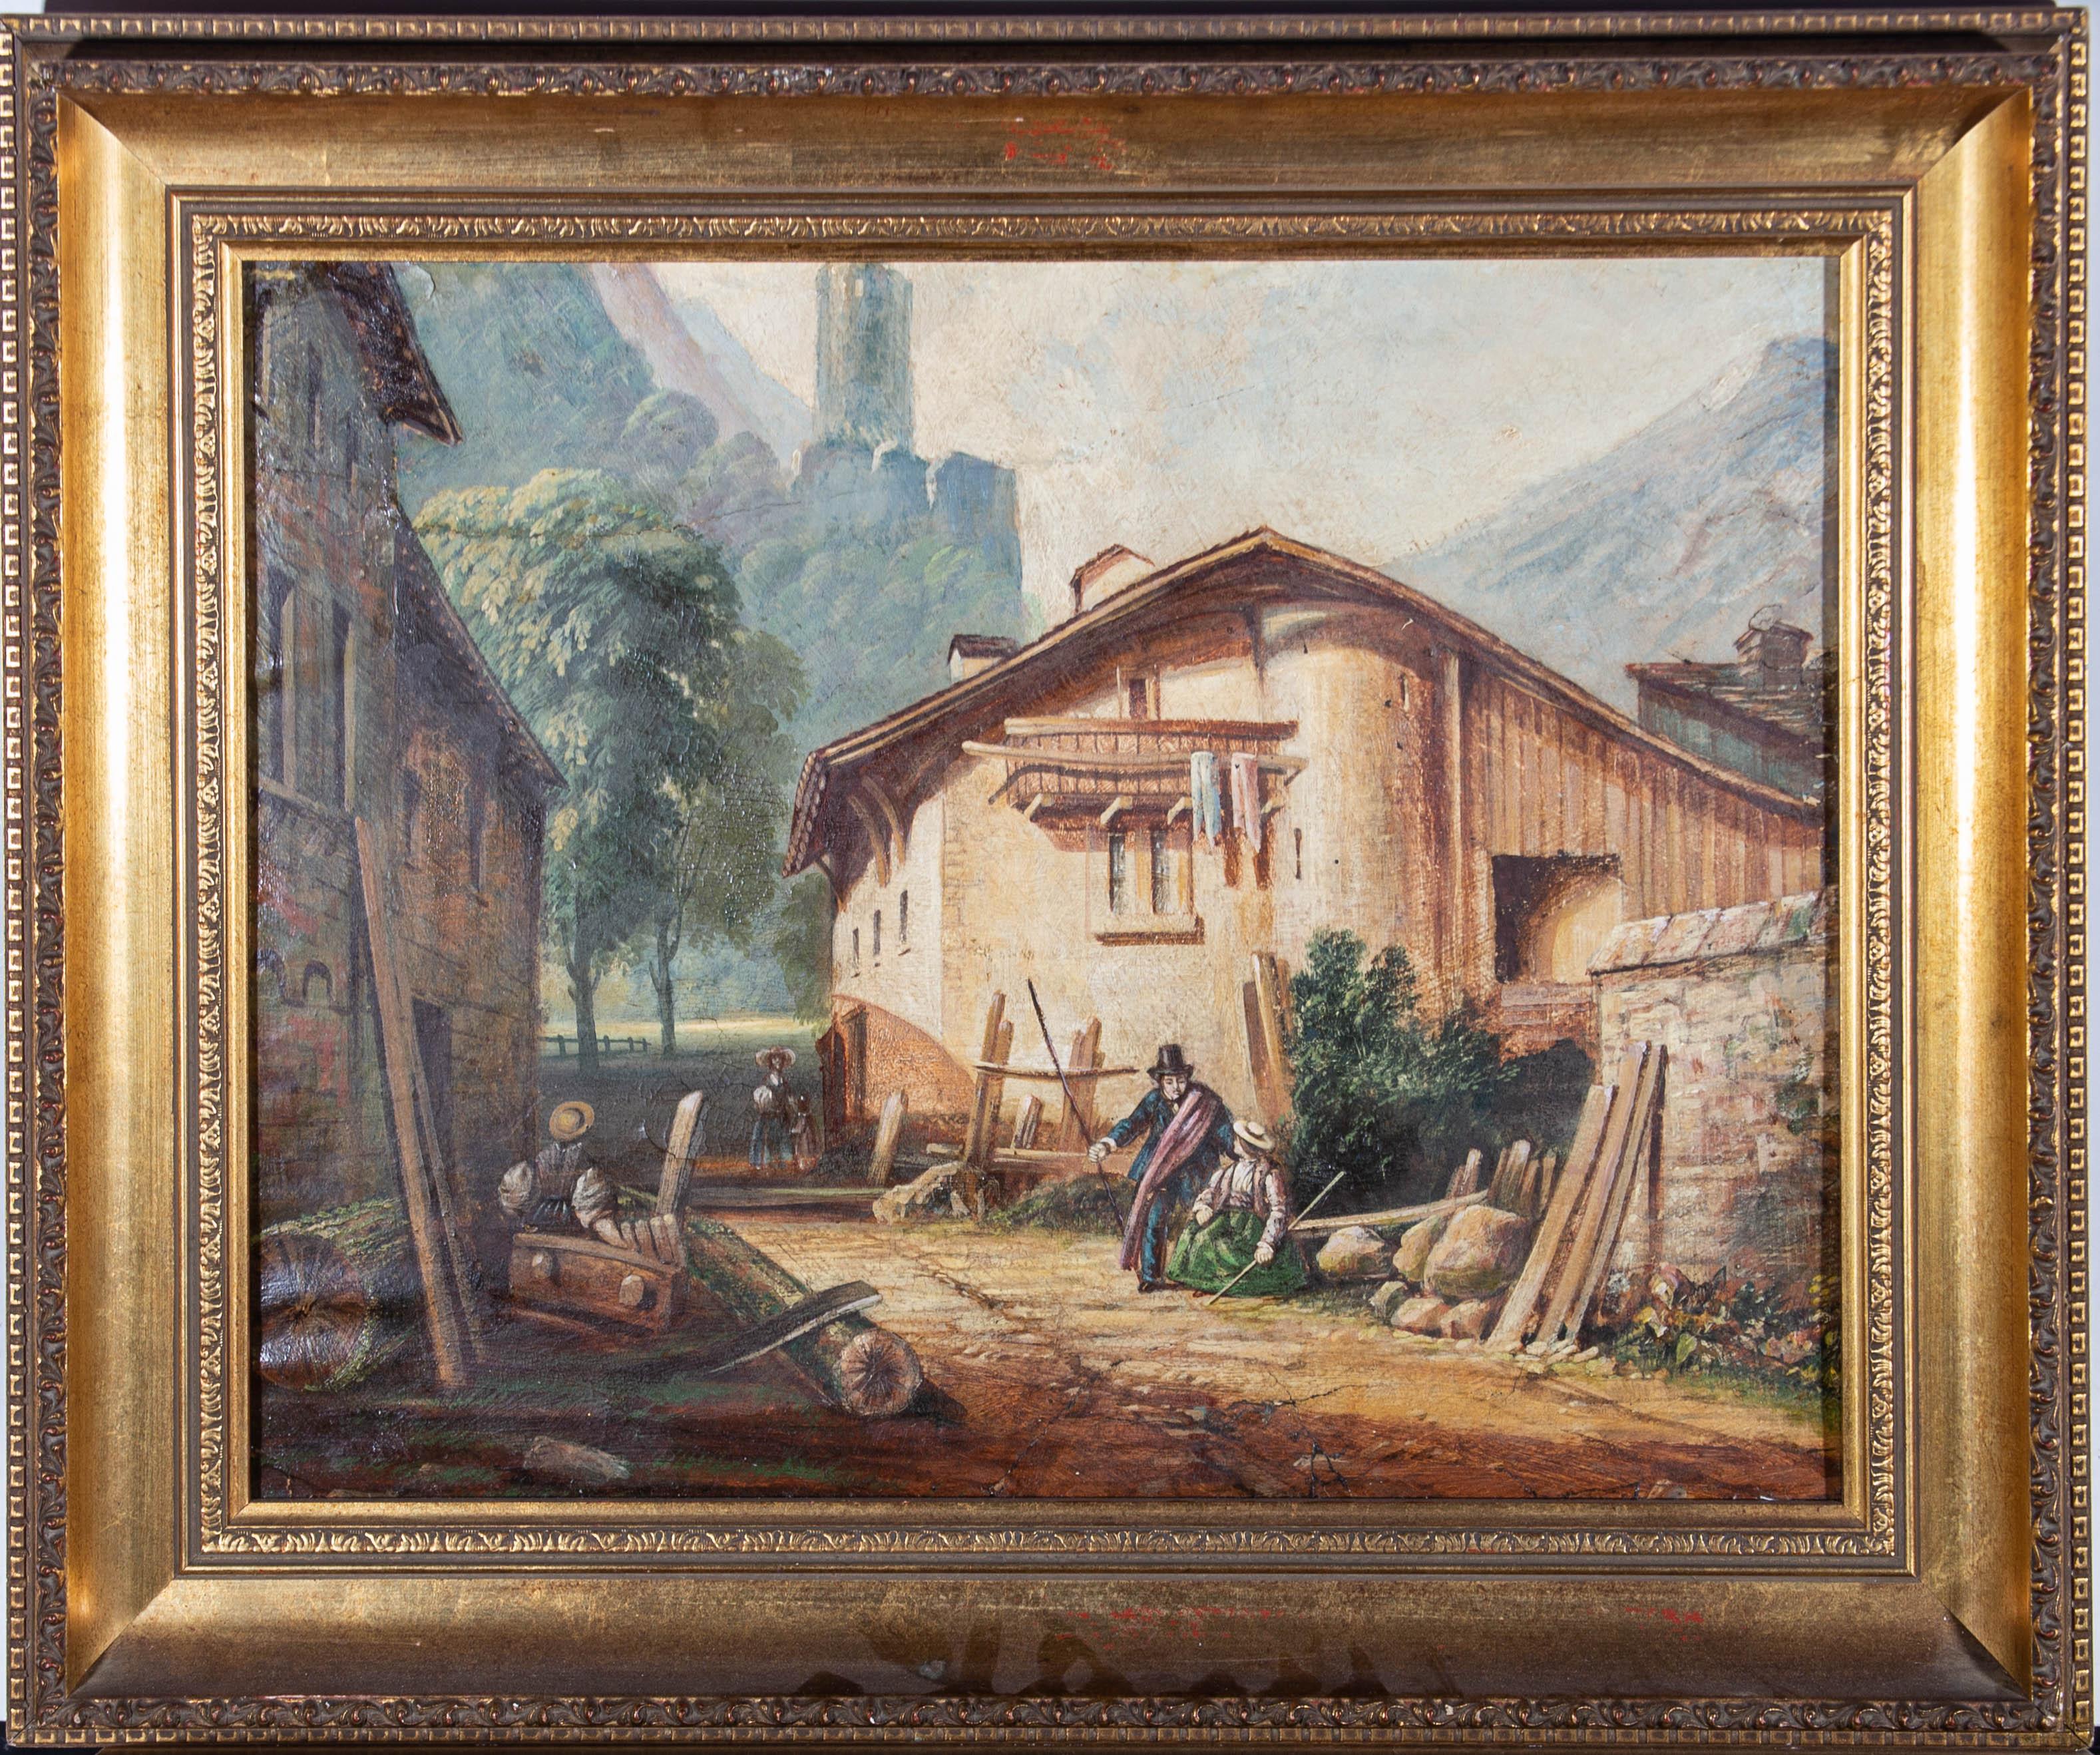 Unknown Abstract Painting - - Early 20th Century Oil, Rustic Chalet